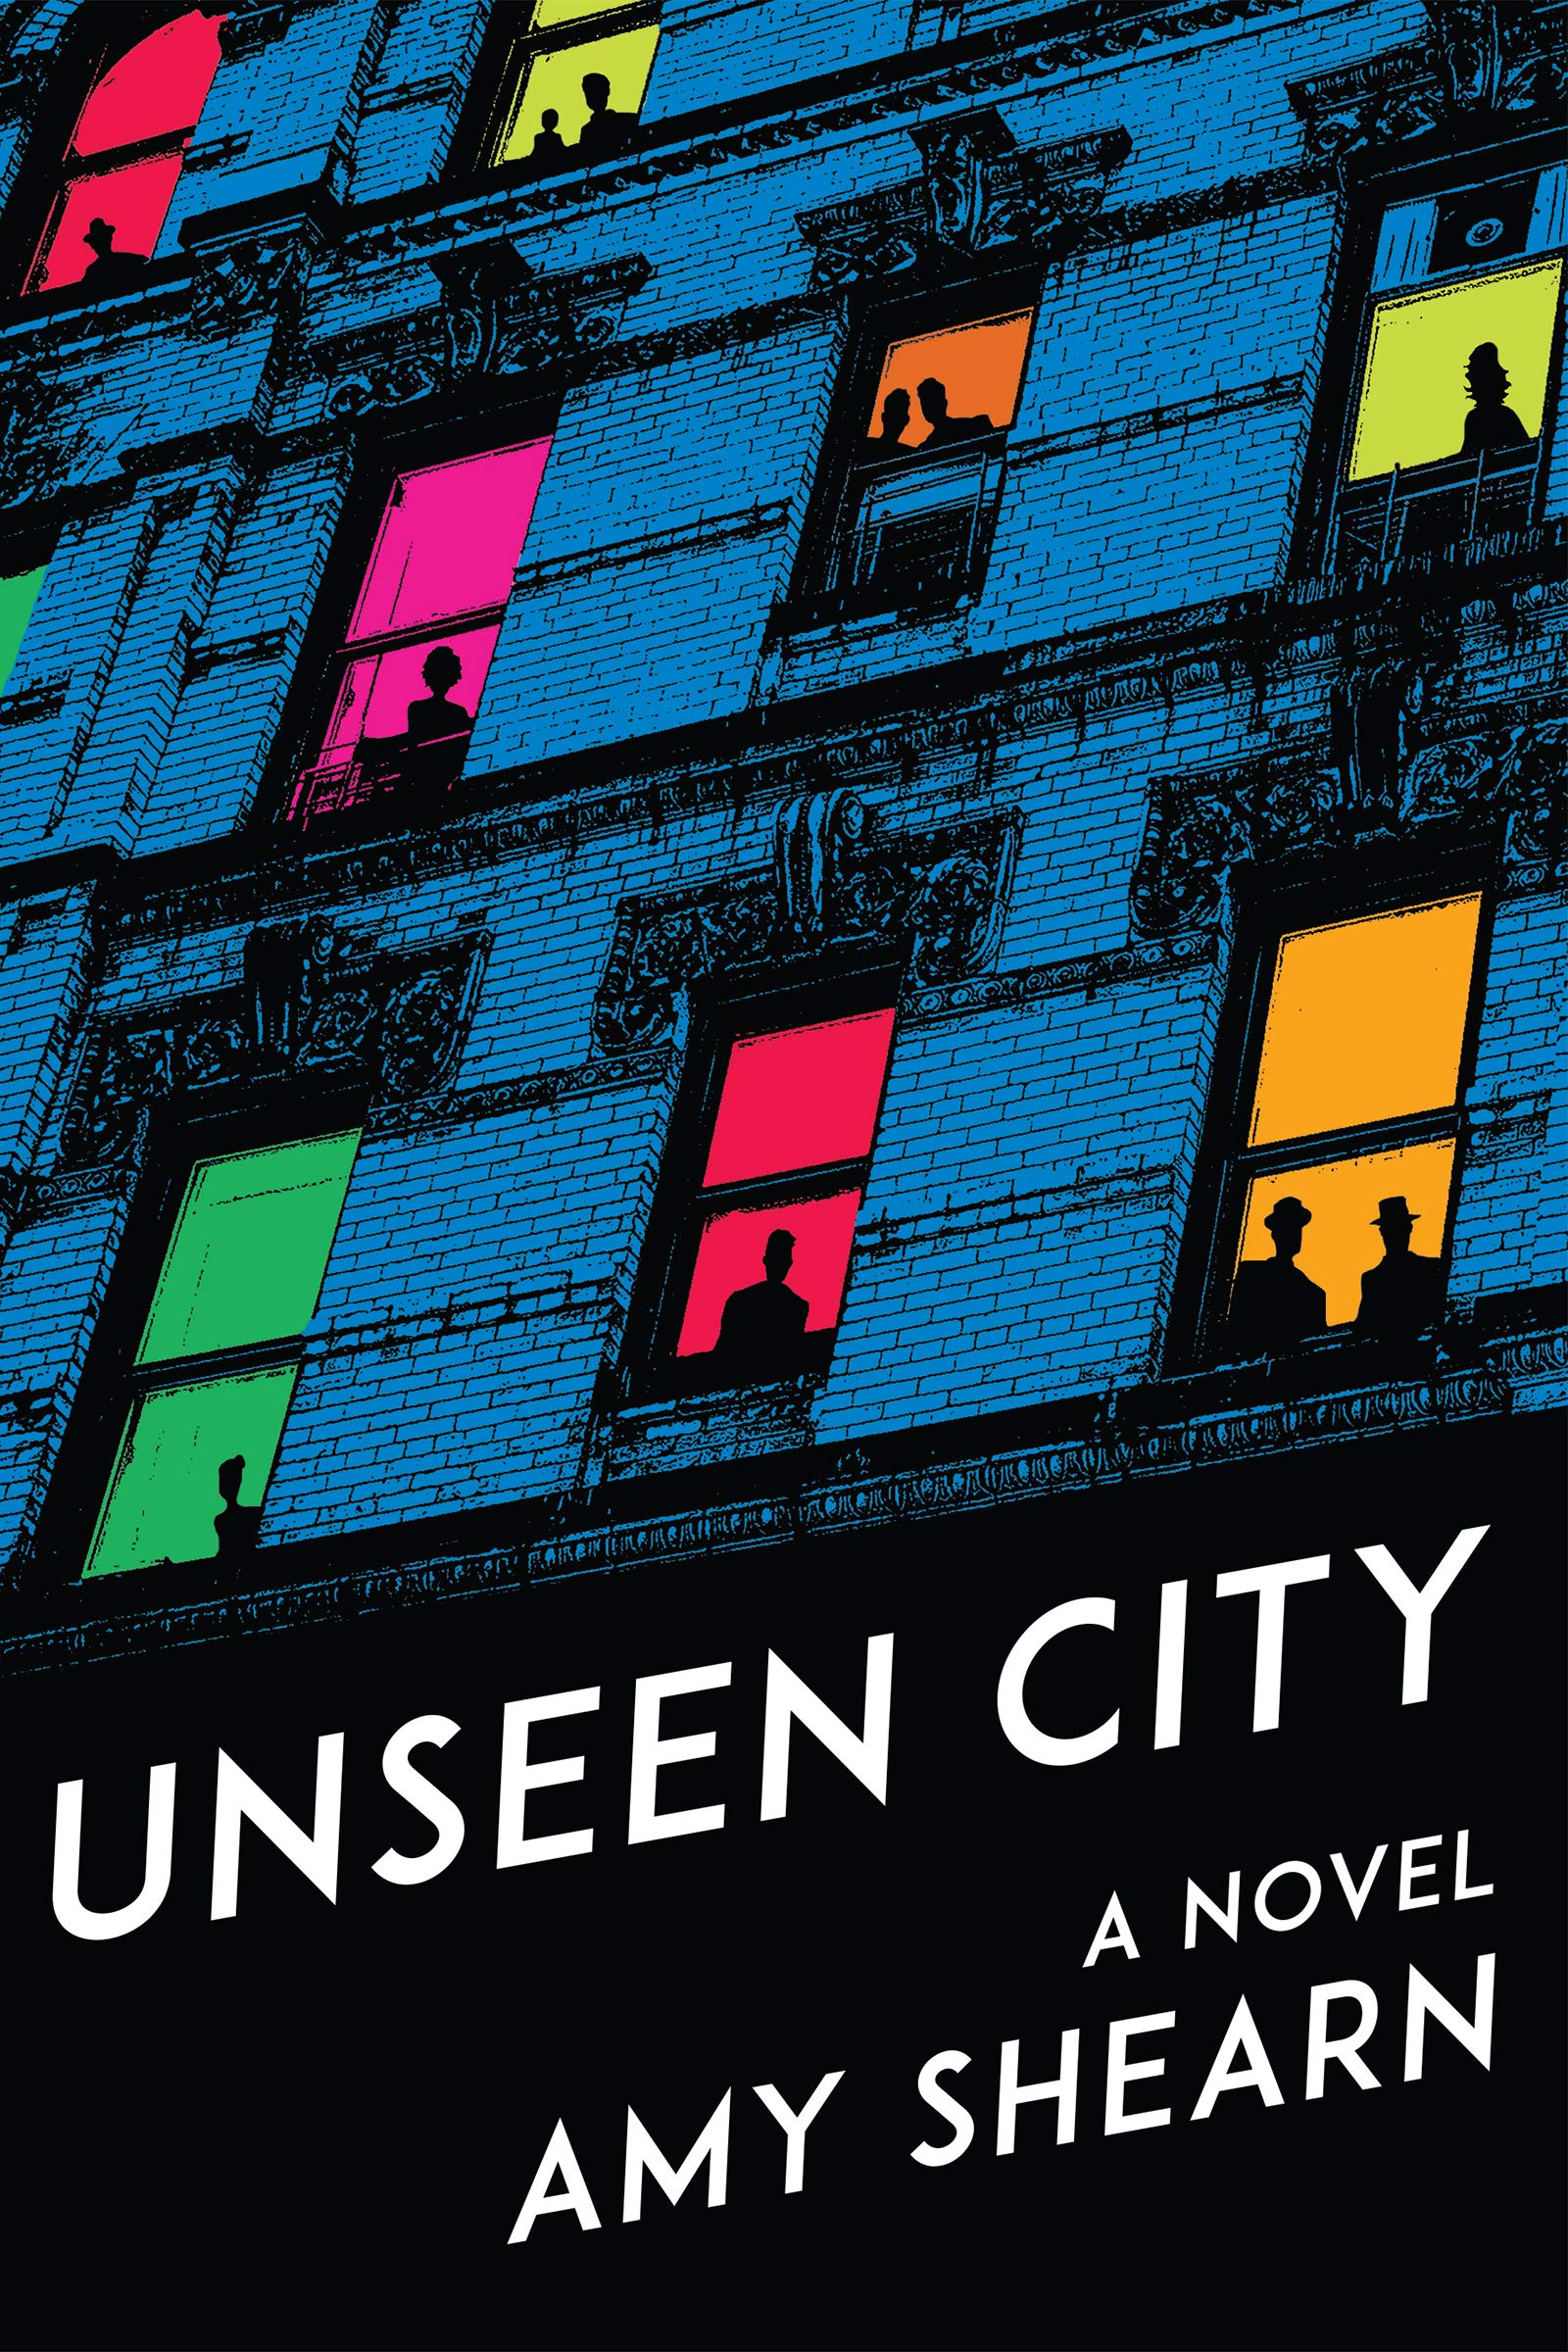 Virtual Book Launch: Unseen City by Amy Shearn in conversation with Siobhan Adcock